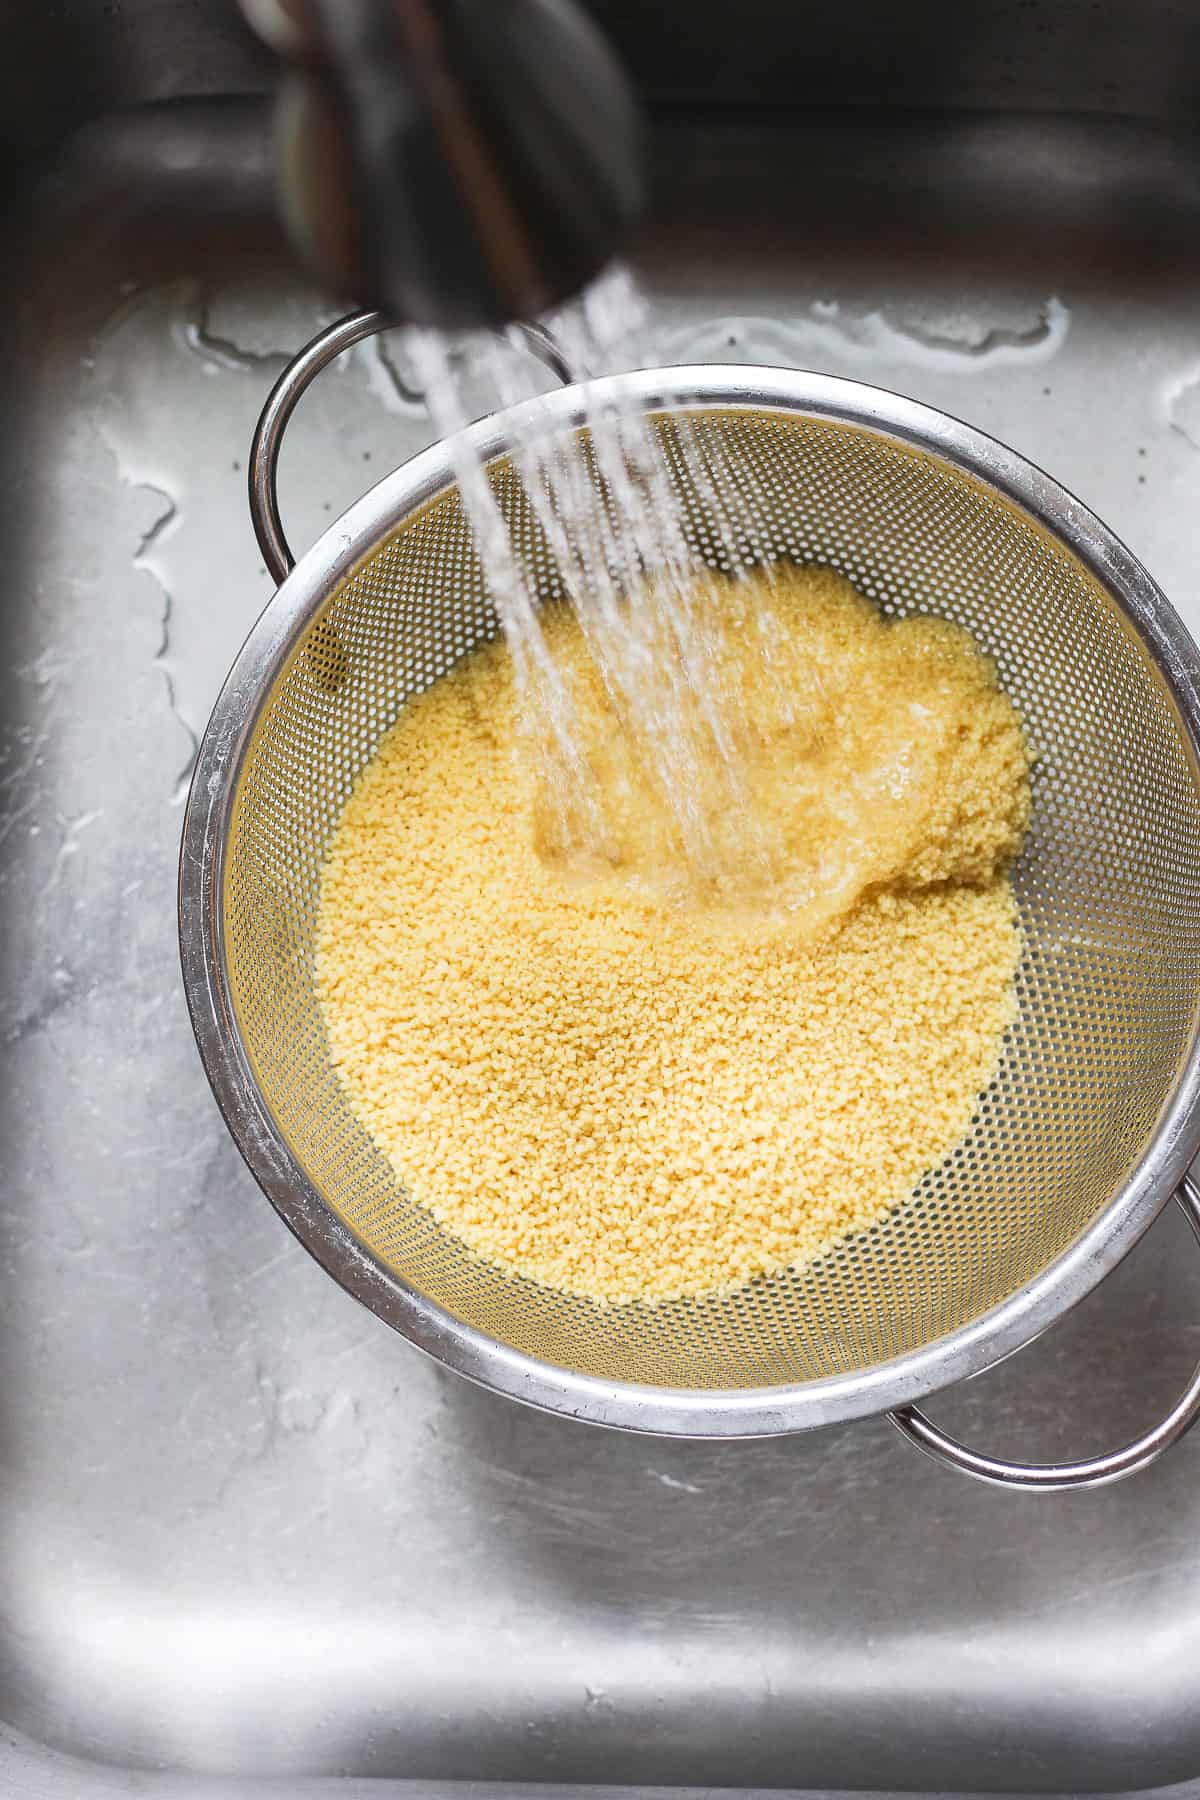 Rinsing Moroccan couscous before cooking it